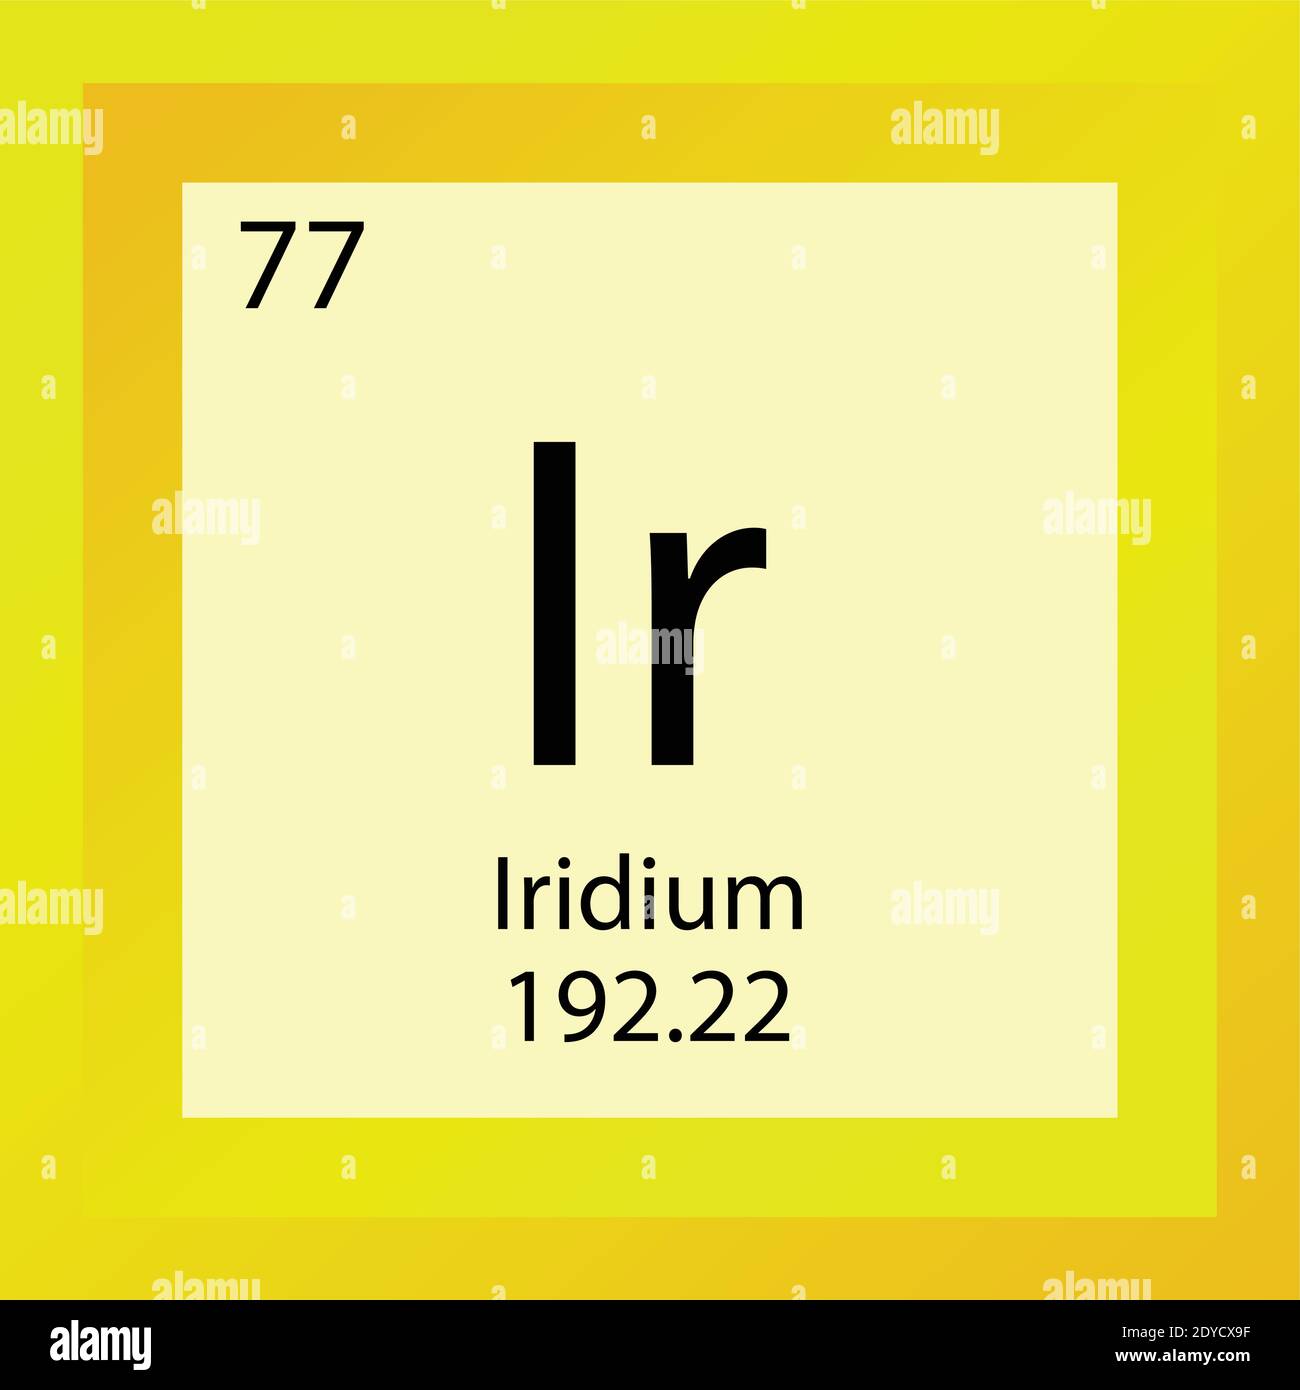 Ir Iridium Chemical Element Periodic Table. Single element vector illustration, transition metals element icon with molar mass and atomic number. Stock Vector